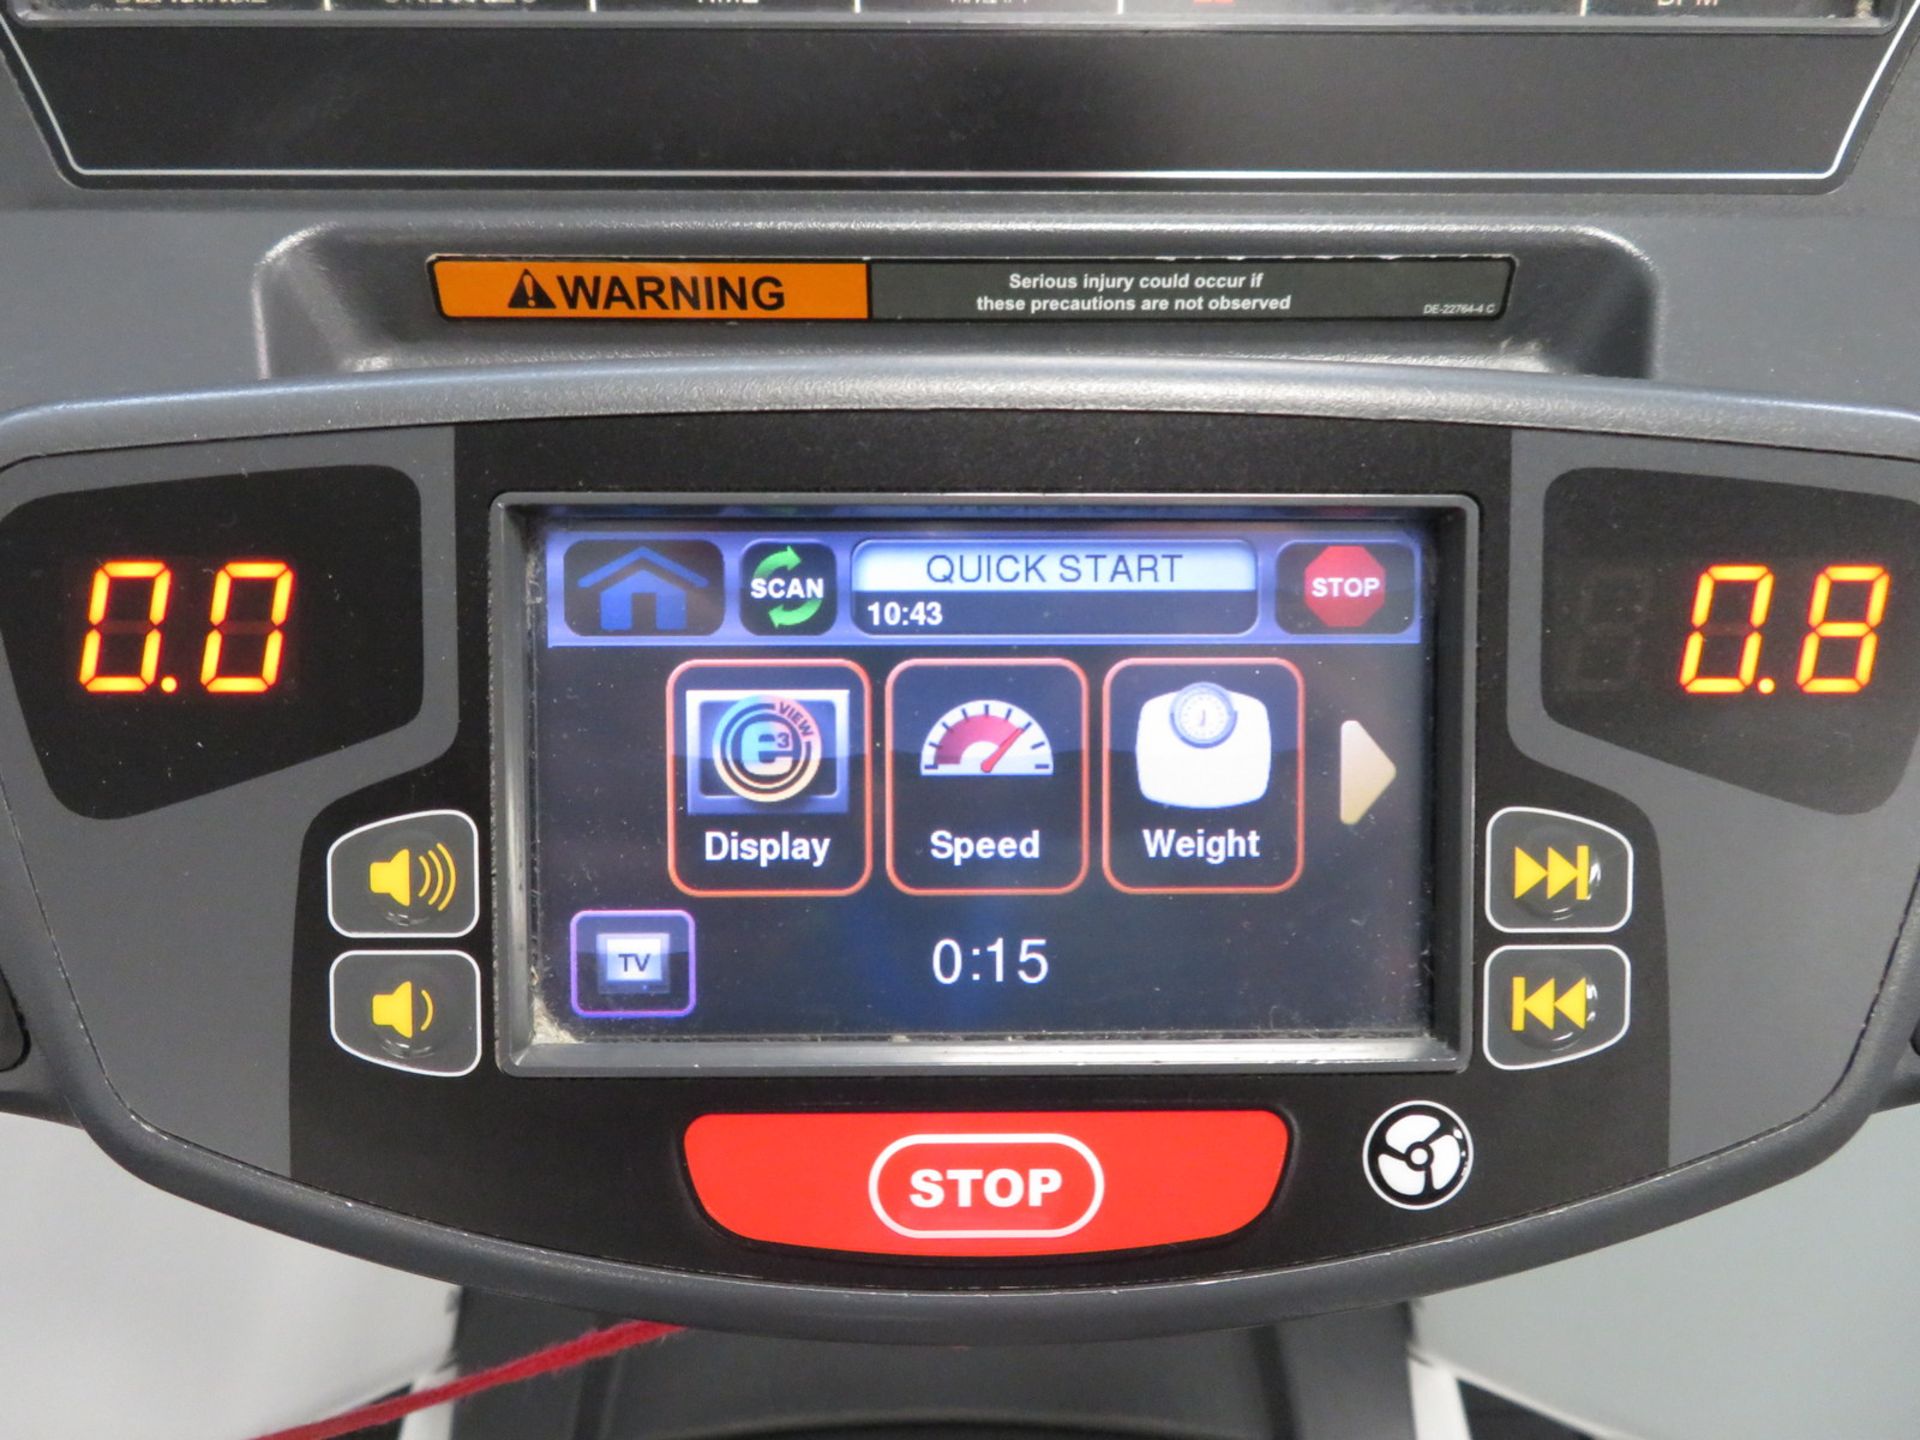 Cybex Treadmill Model: 770T, Working Condition With TV Display Monitor. - Image 5 of 10